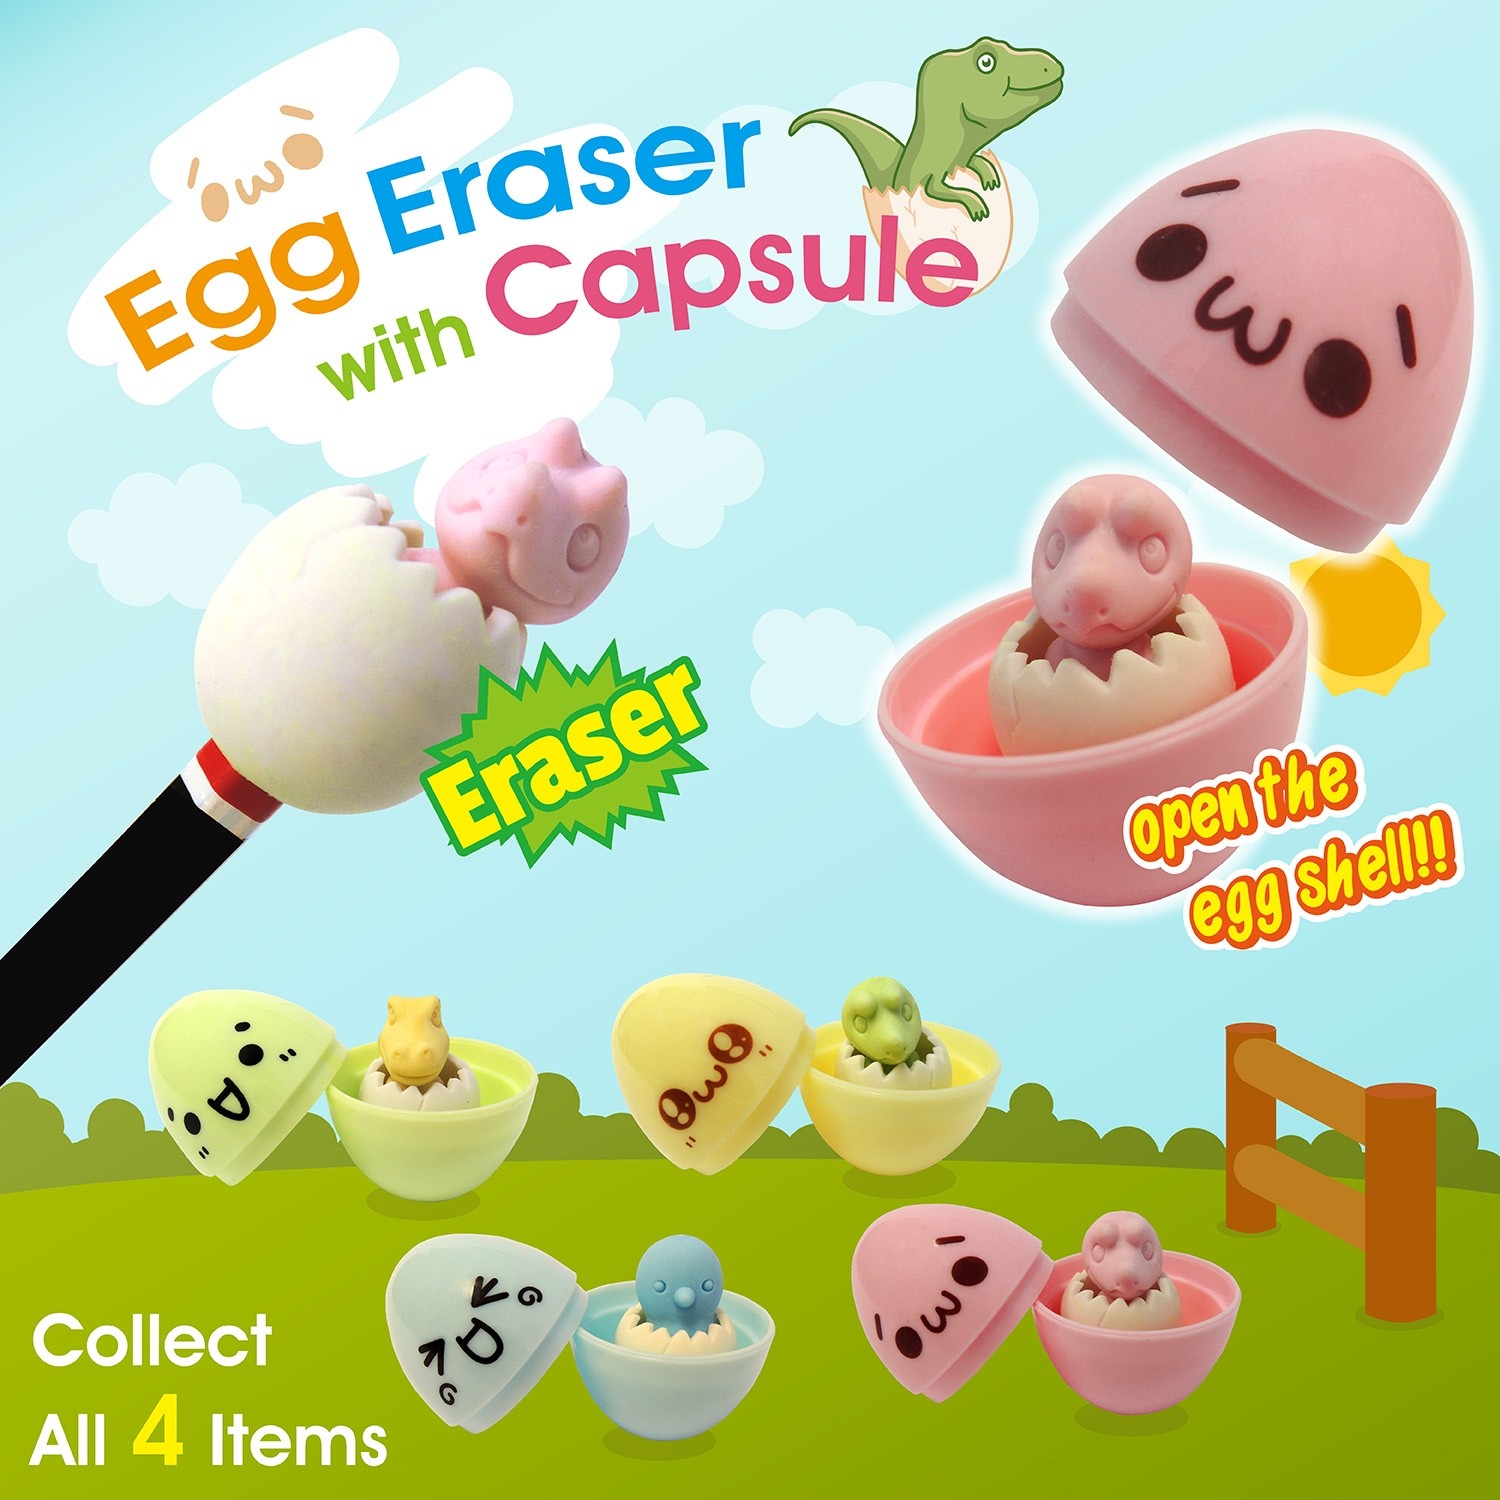 Egg Eraser with Capsule